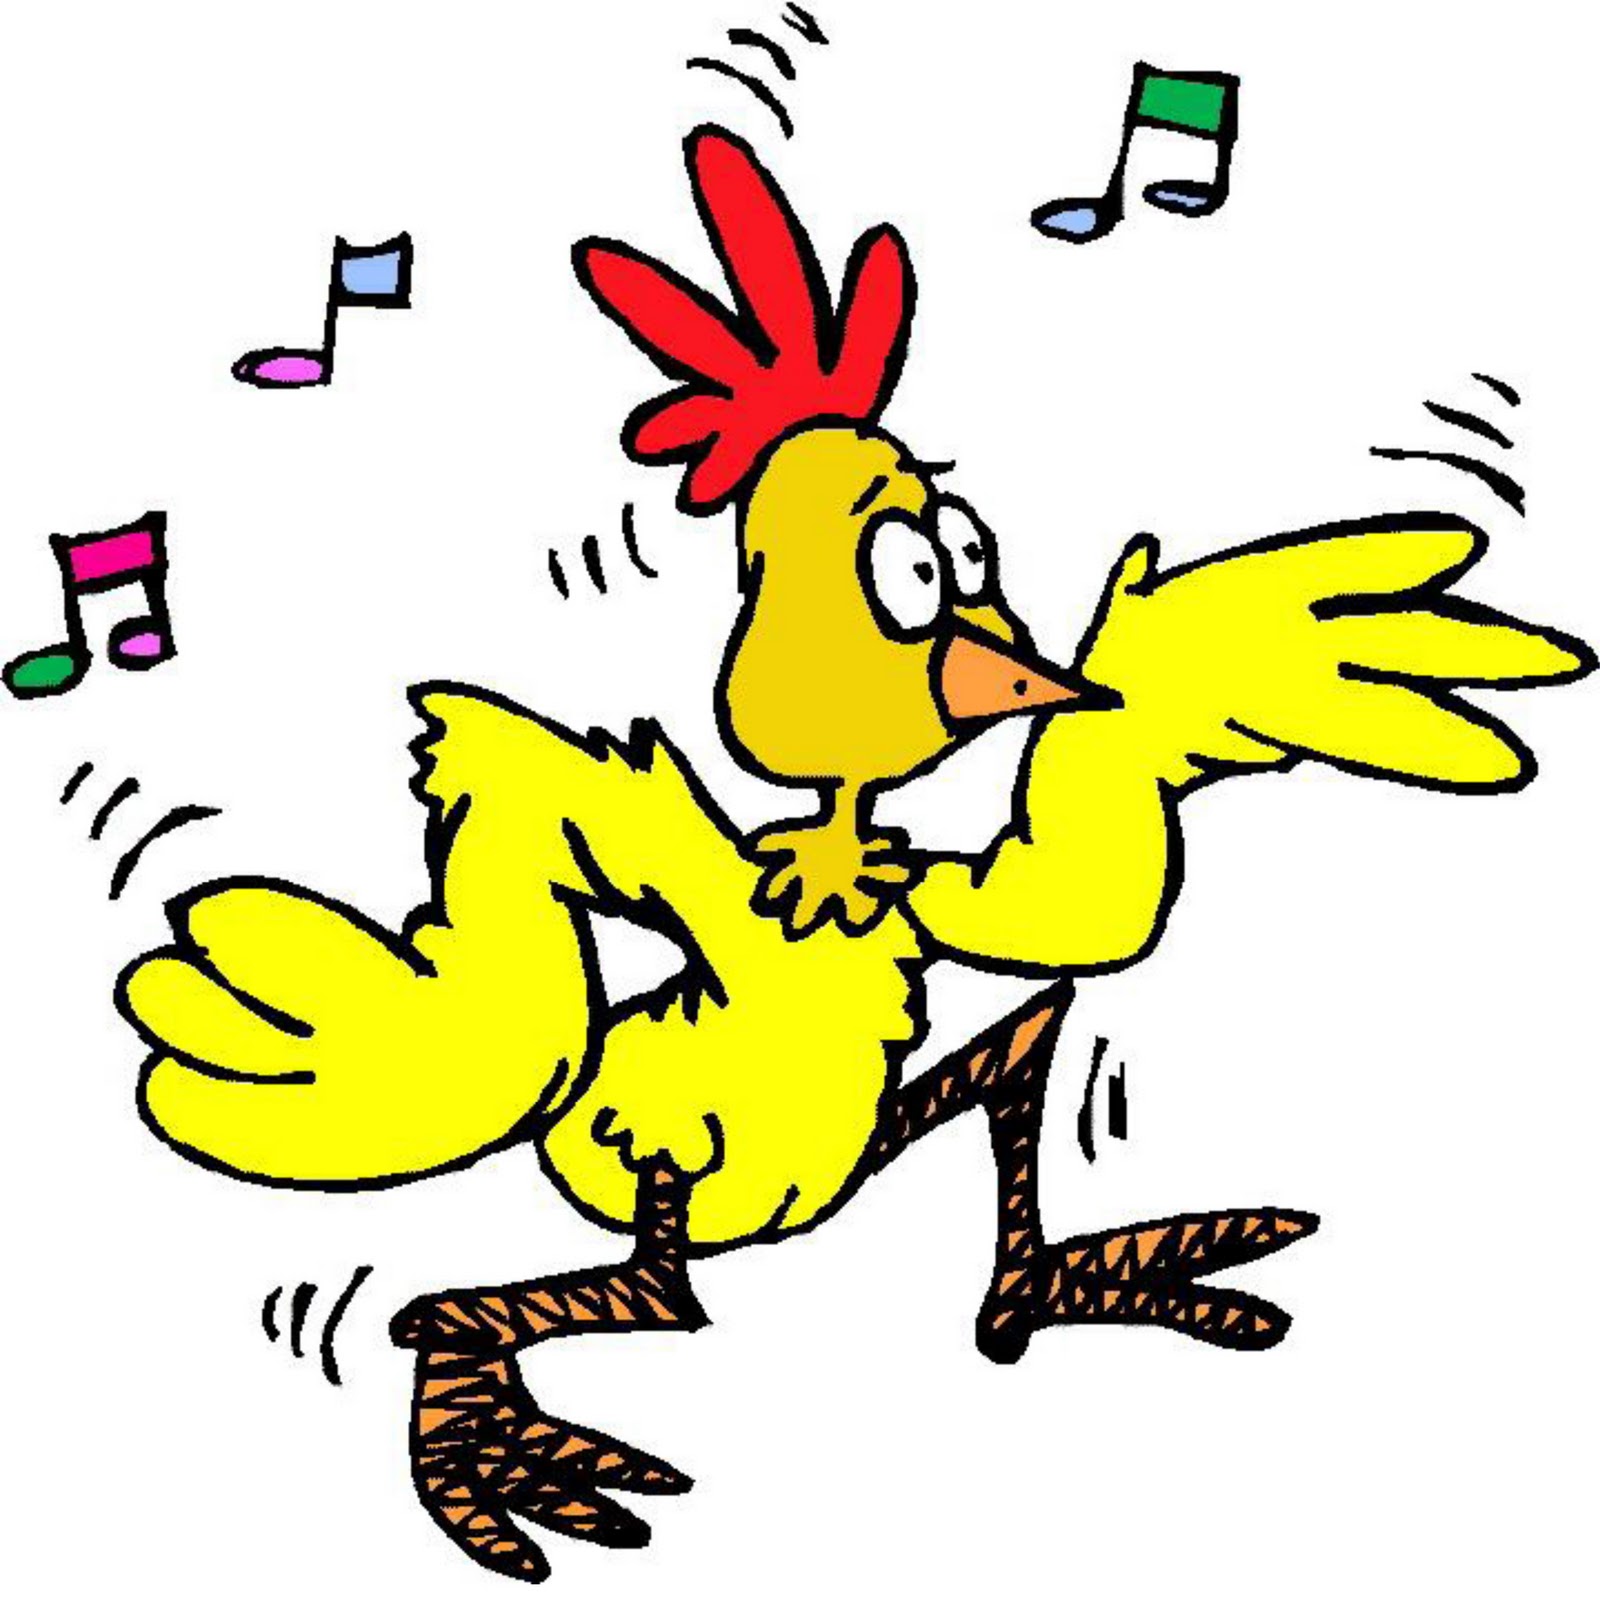 Funky Chicken Dancing Animated Gif   Clipart Best   Clipart Best